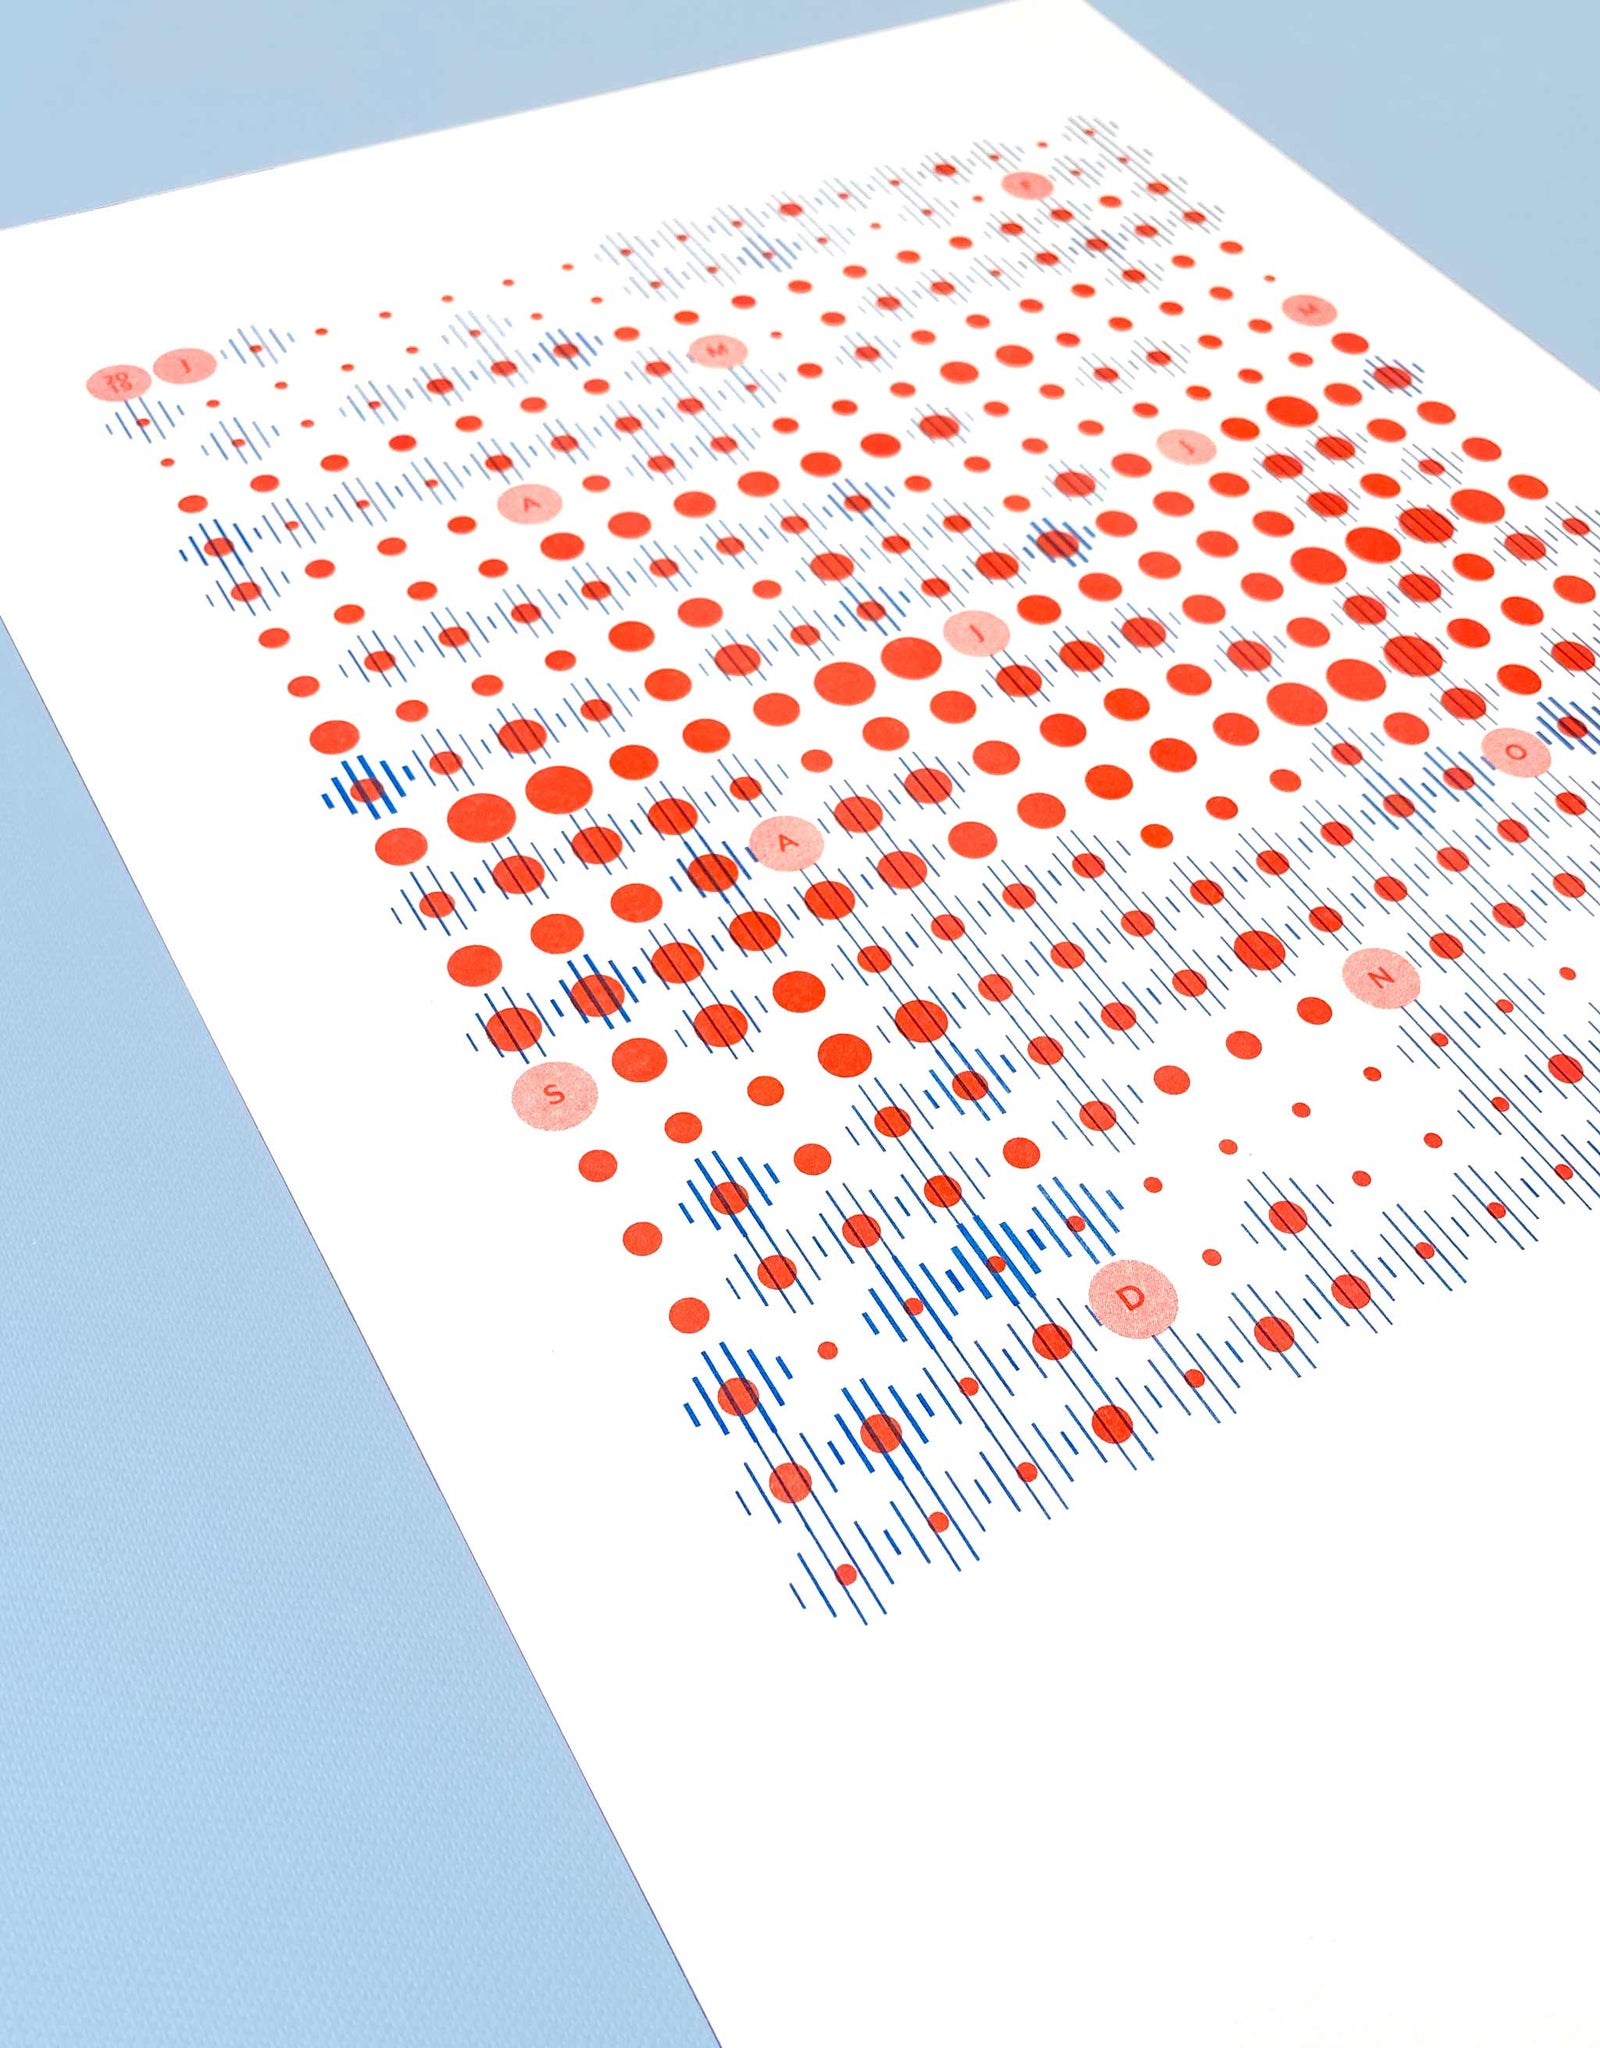 Low angle shot of data-visualisation print of Amsterdam weather pattern in blue and red grid formation on white paper